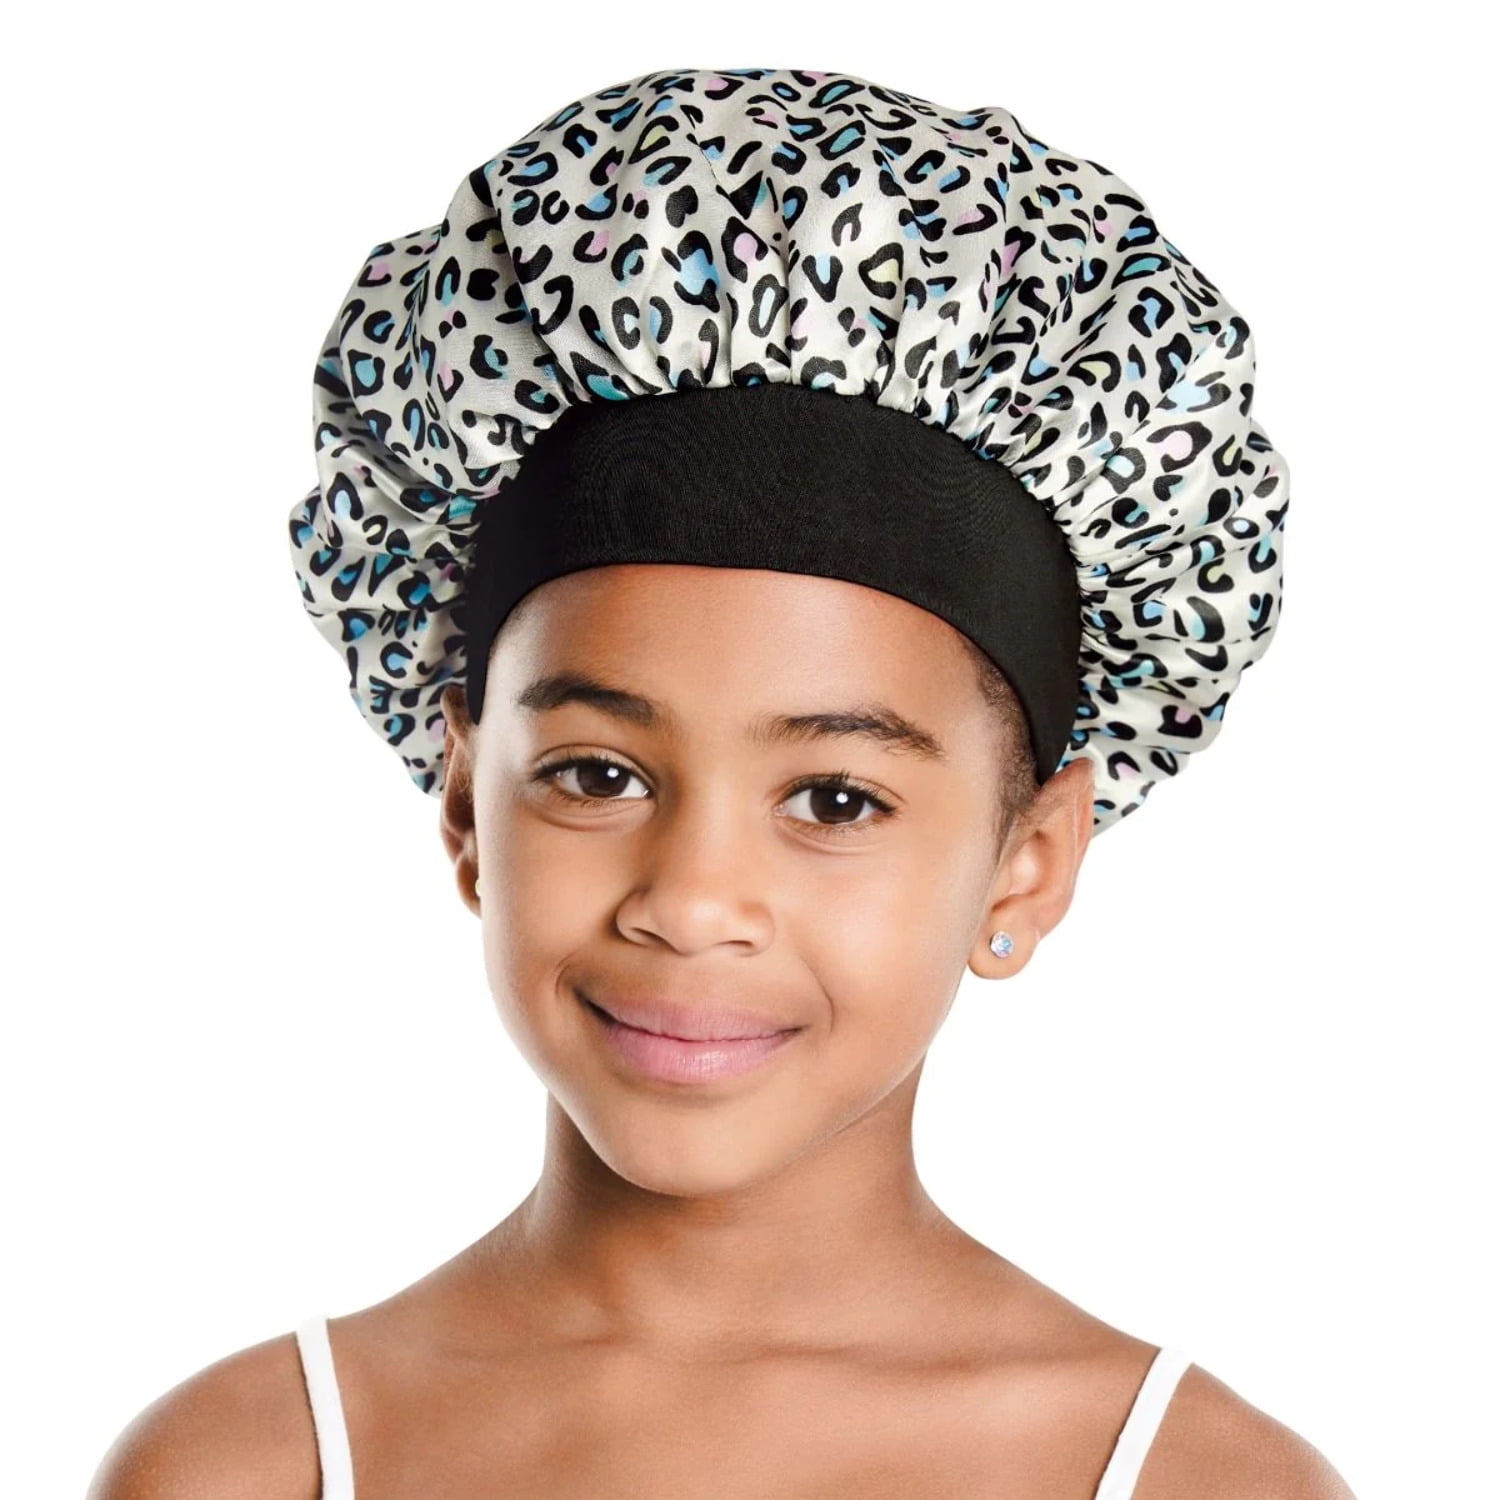 Pink Vault - Louis Vuitton inspired Bonnet 🤍 Silky Satin Sleeping Bonnets  are designed to protect your hair in a fashionable & comfortable way!  Benefits: Helps reduce dryness, frizzness, tangles, breakage, 